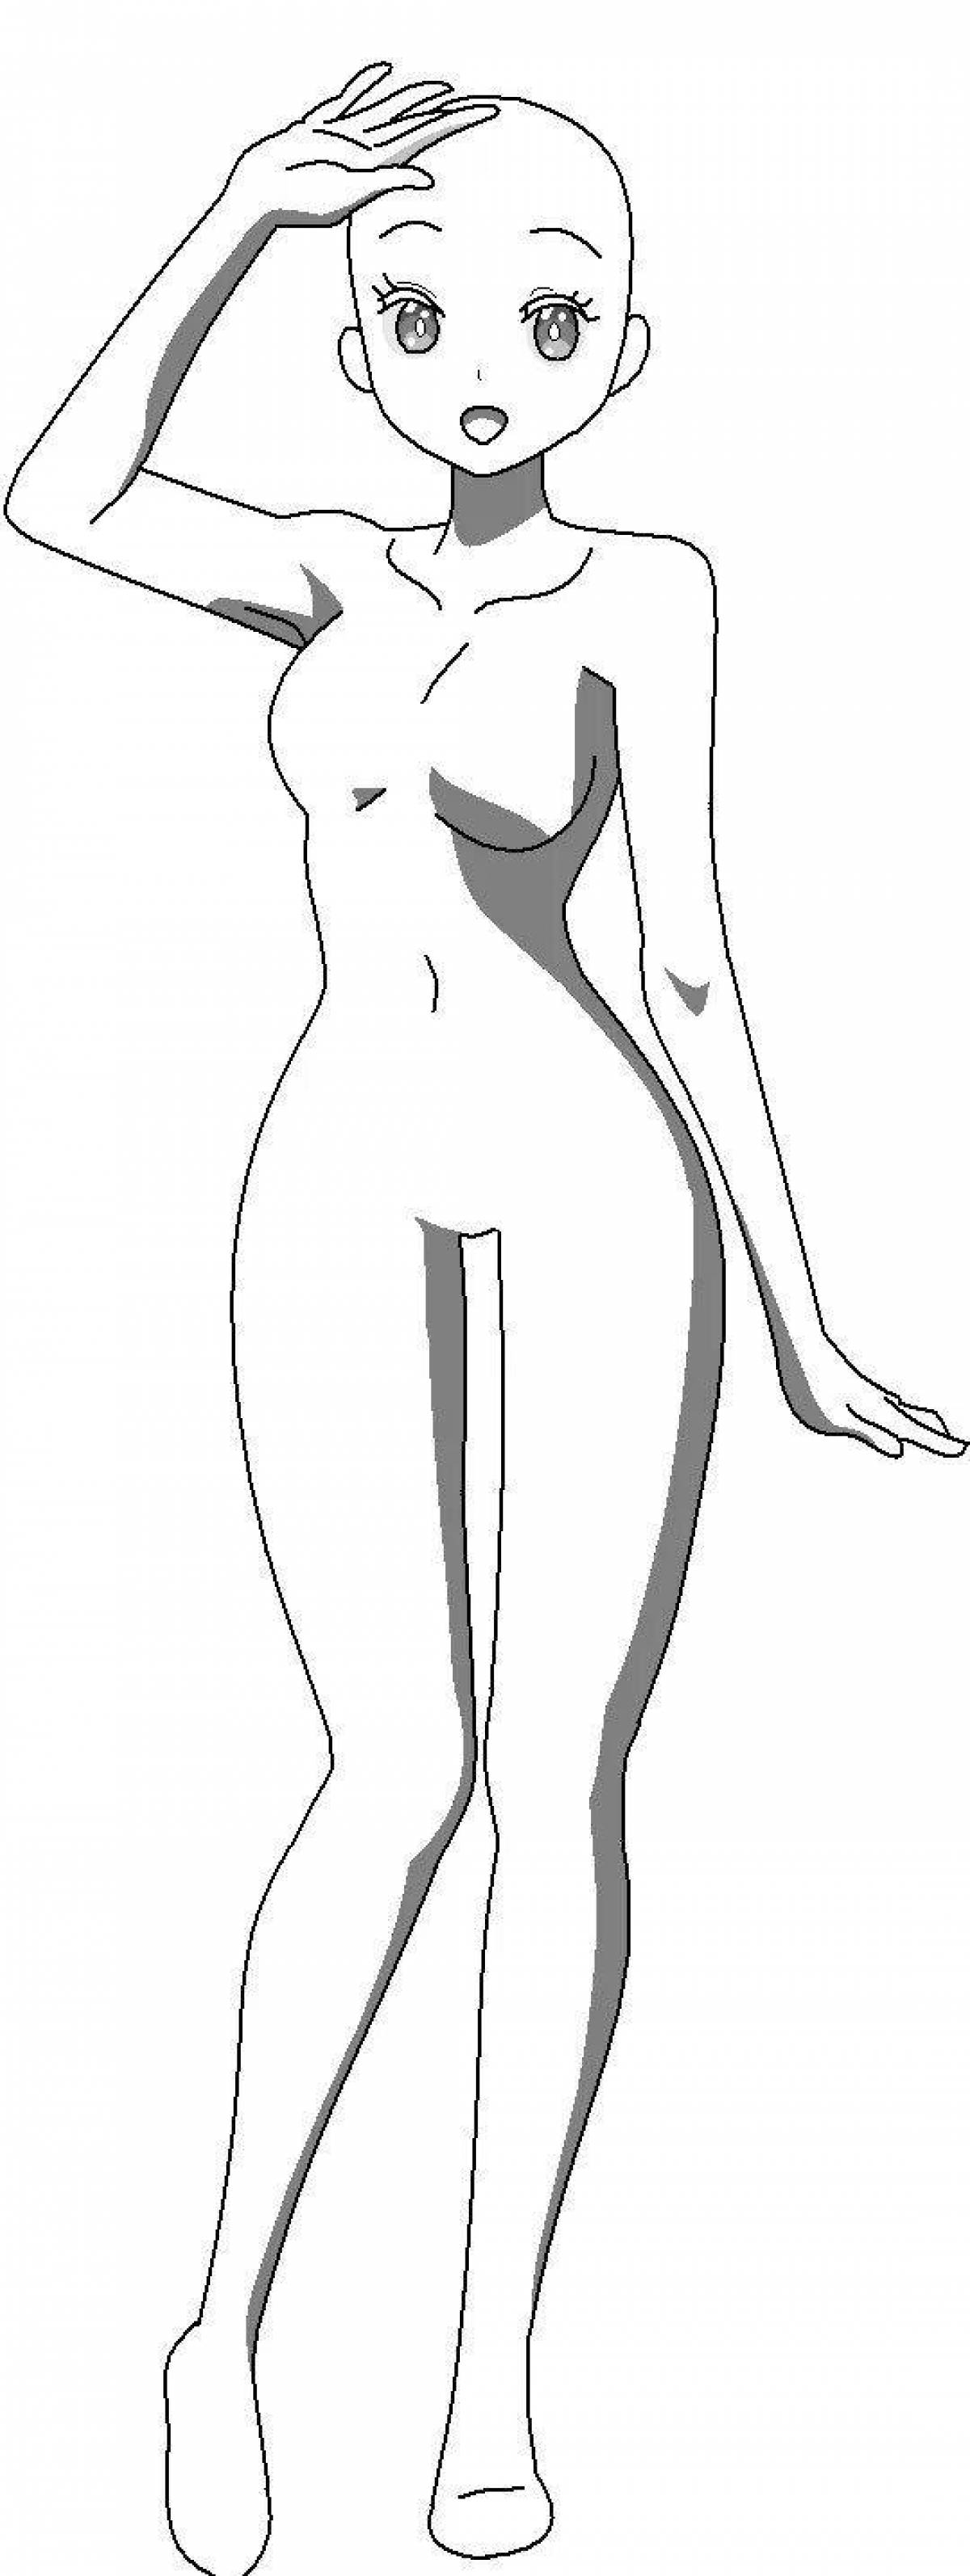 Anime glowing body coloring page